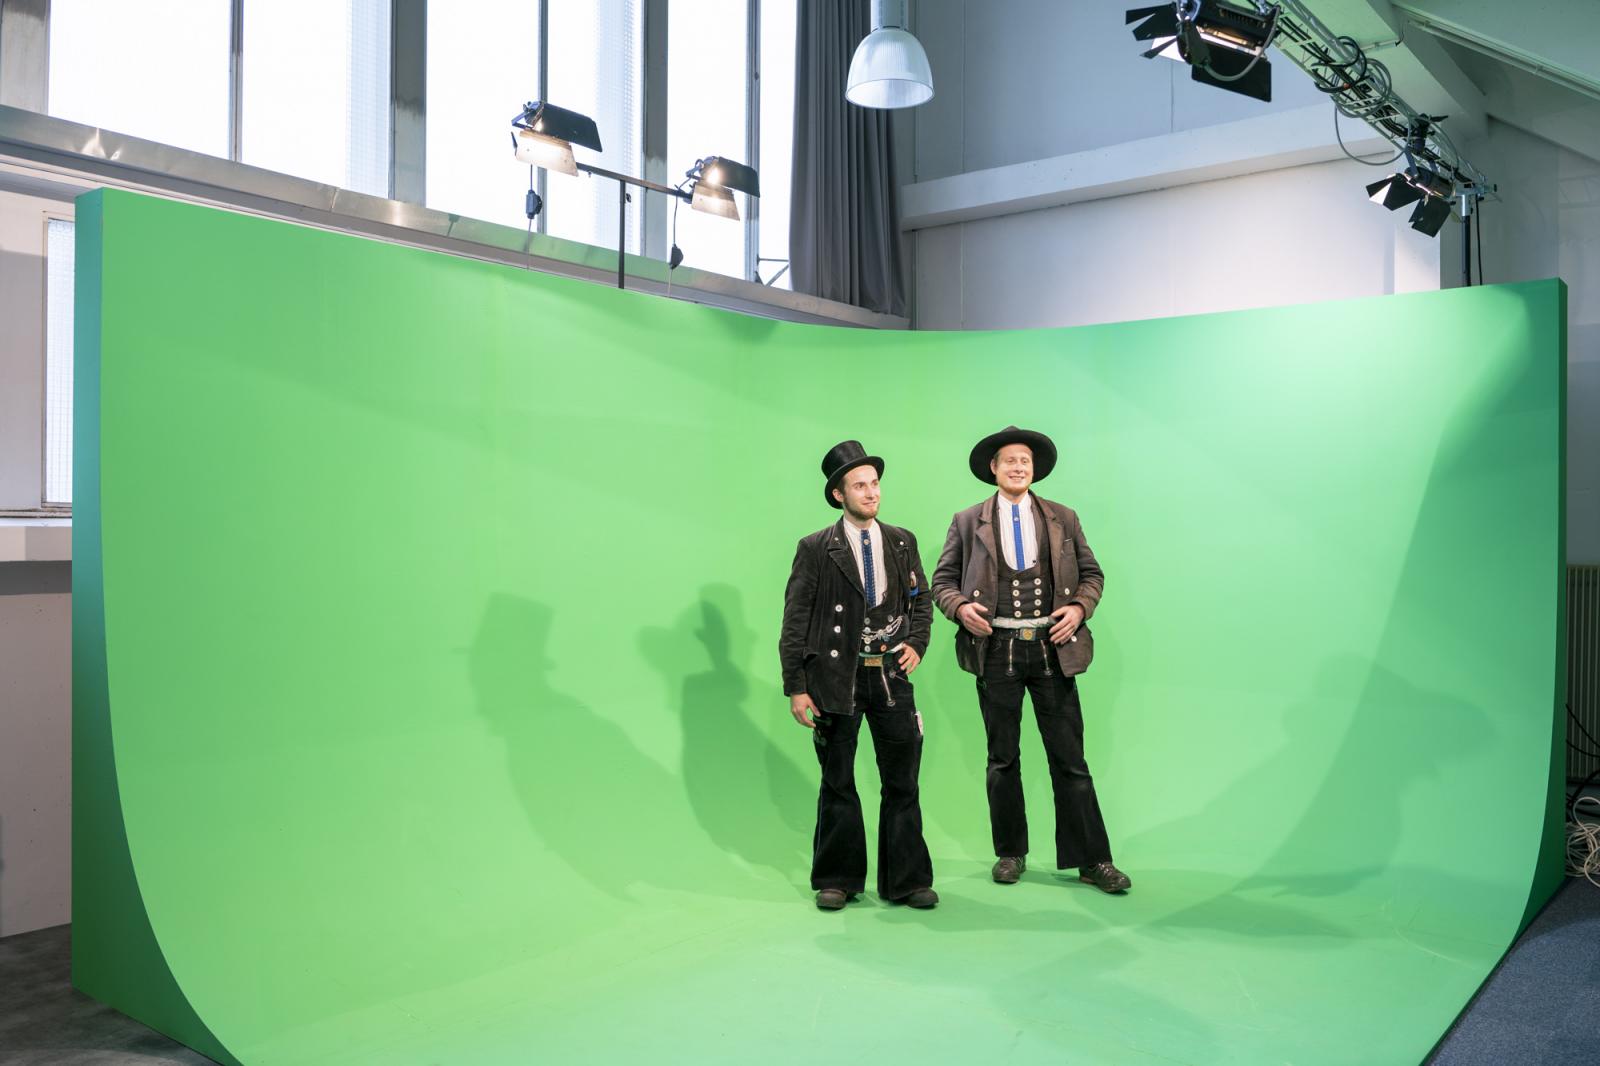   -  Matthias (L) and Ben stand on the green screen of the media studio at the University of Arts in...